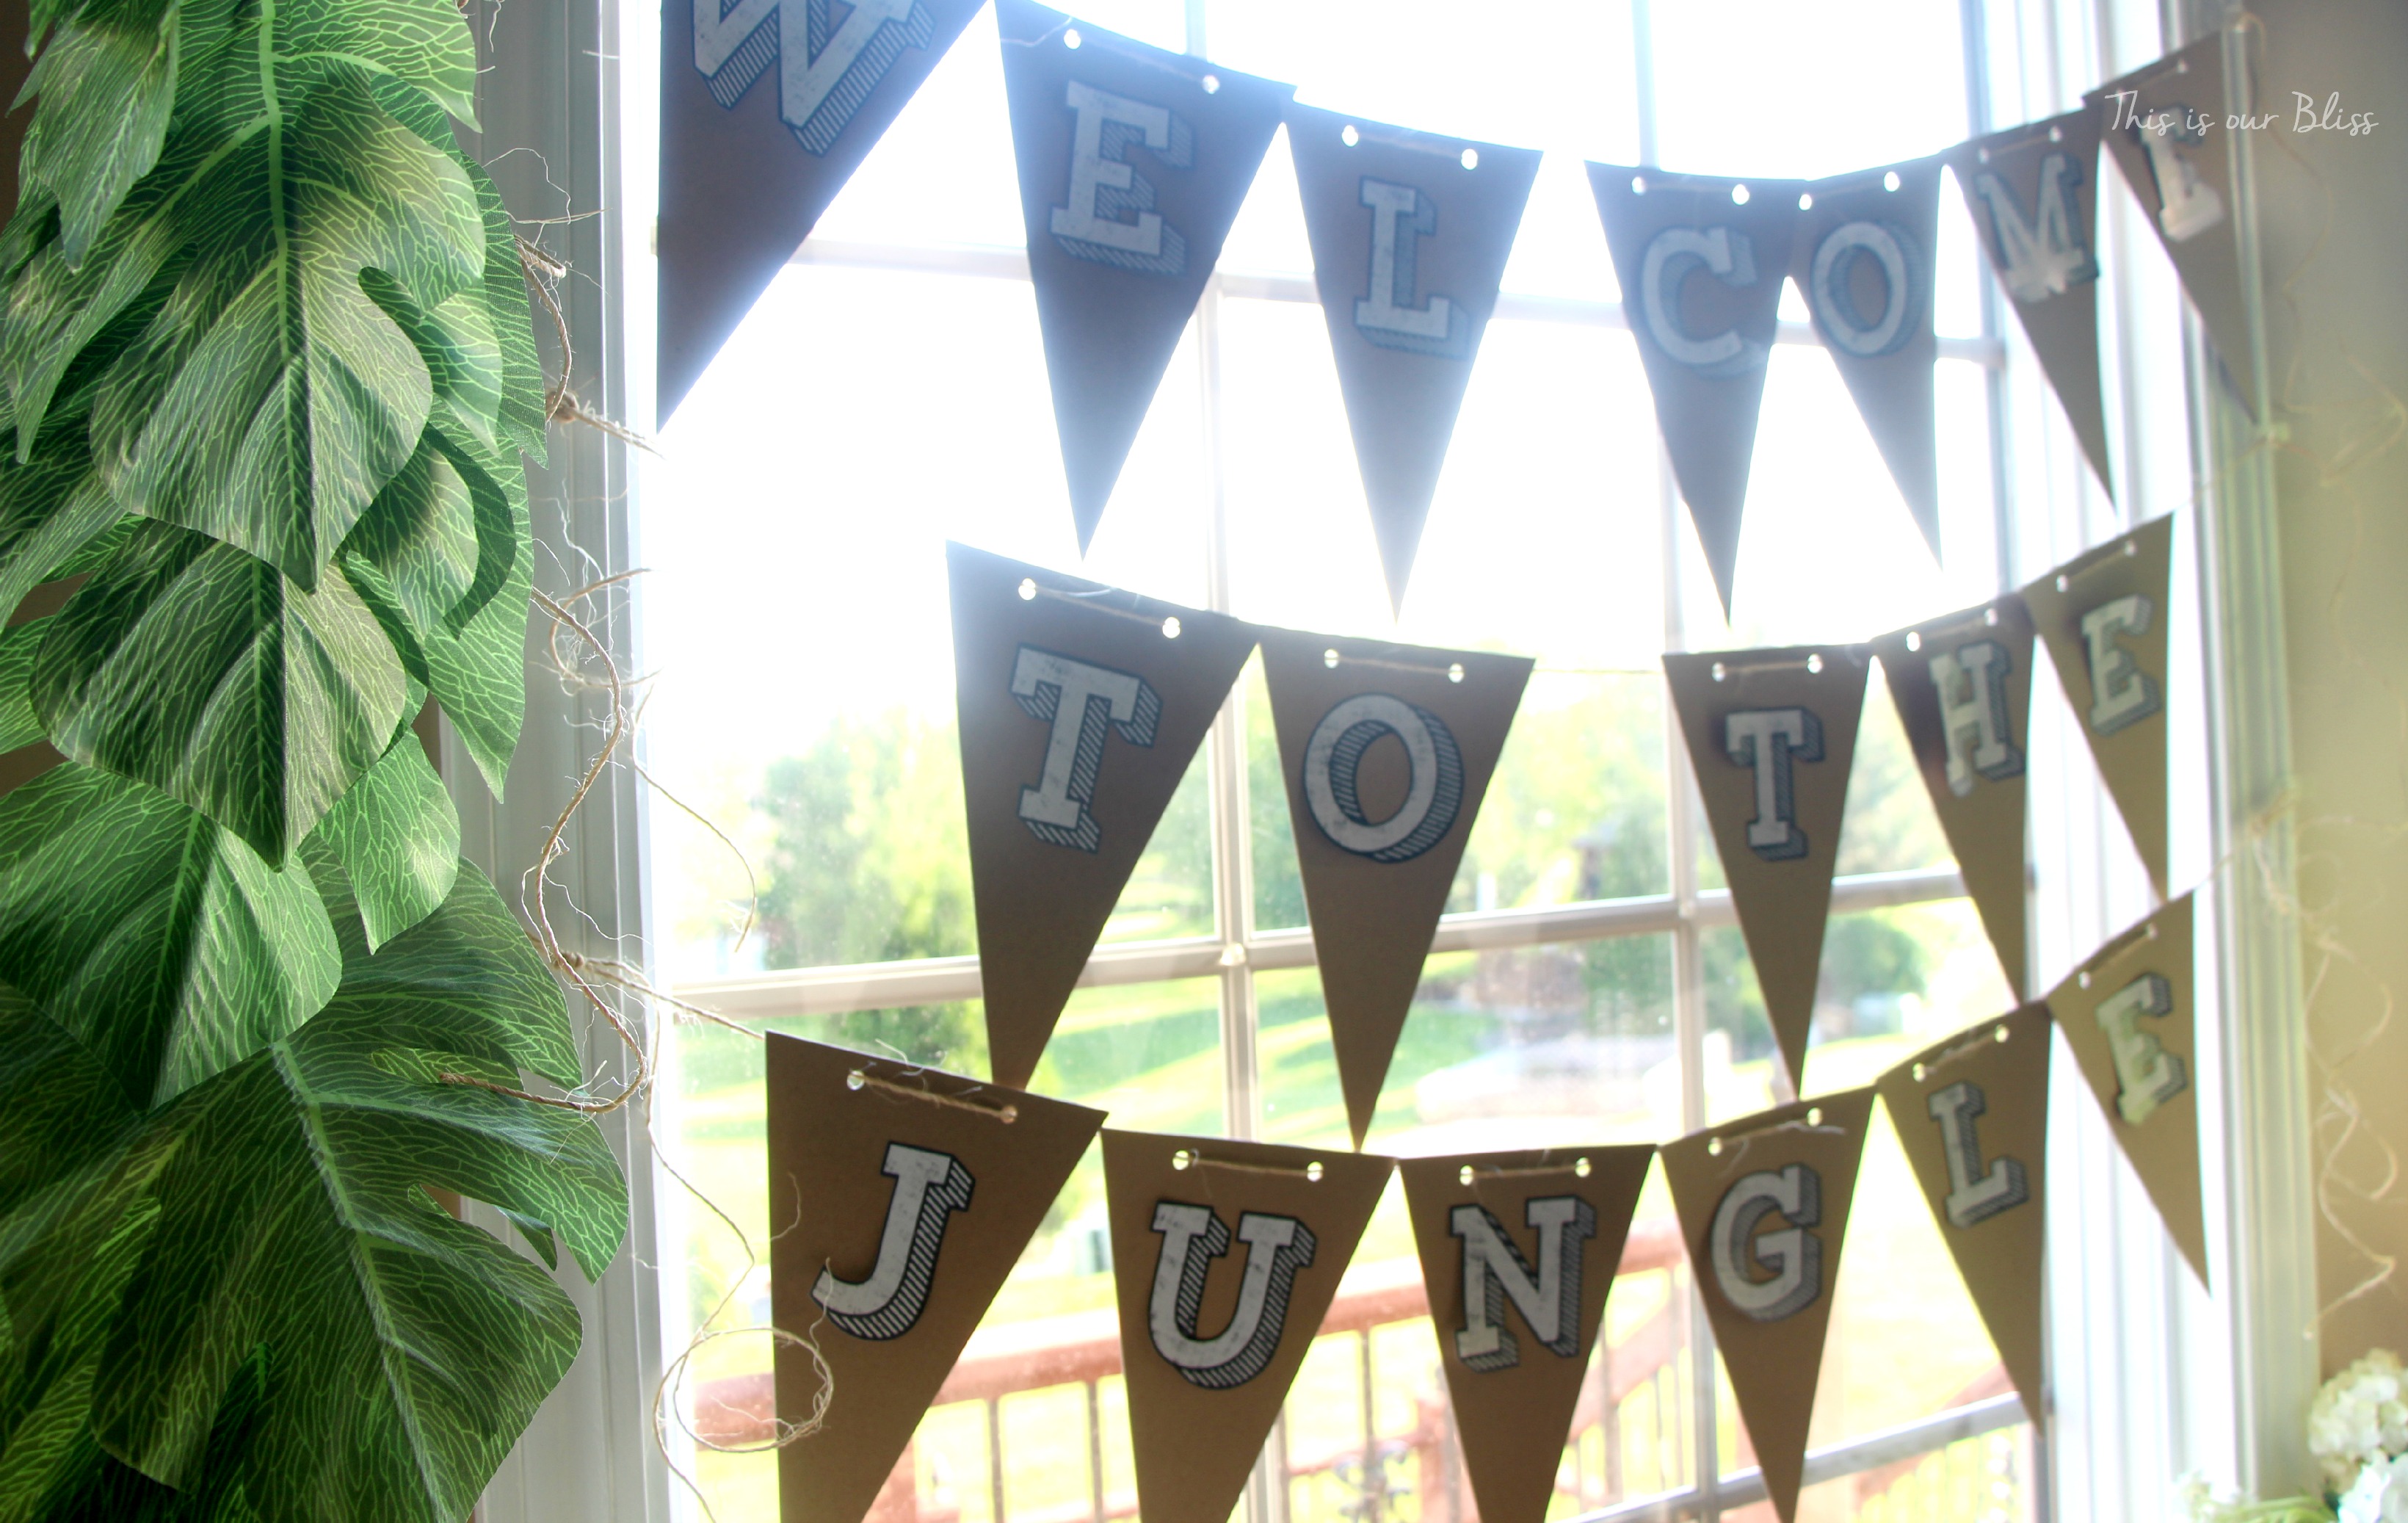 welcome to the jungle - diy bunting - safari style soiree - 1st birthday party decorations - this is our bliss